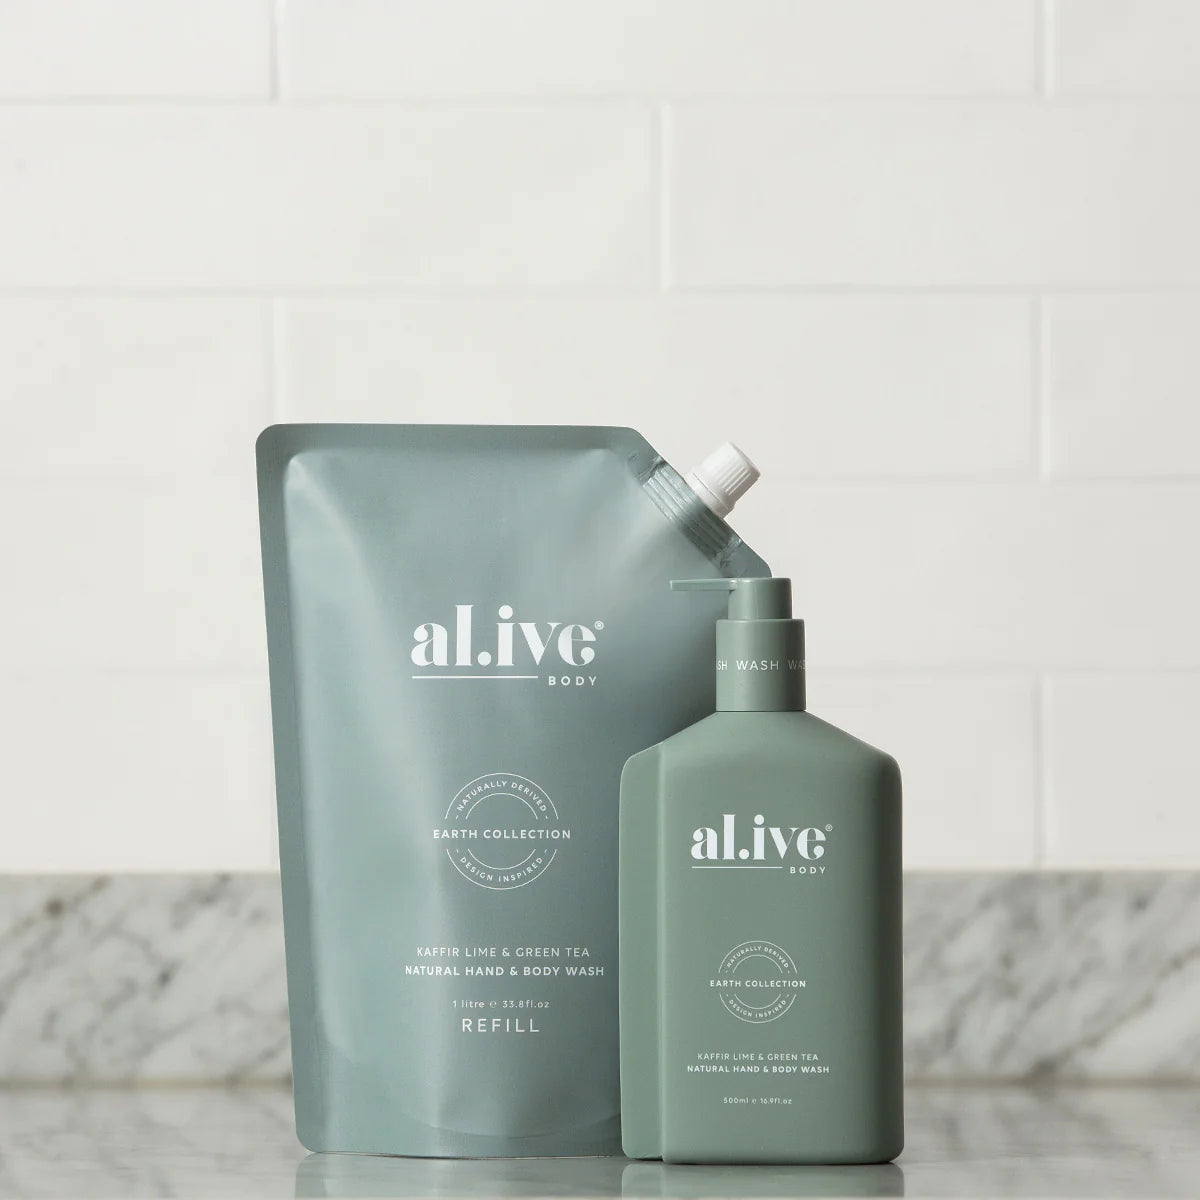 al.ive 1L Hand and Body Wash Refill in Kaffir Lime and Green Tea